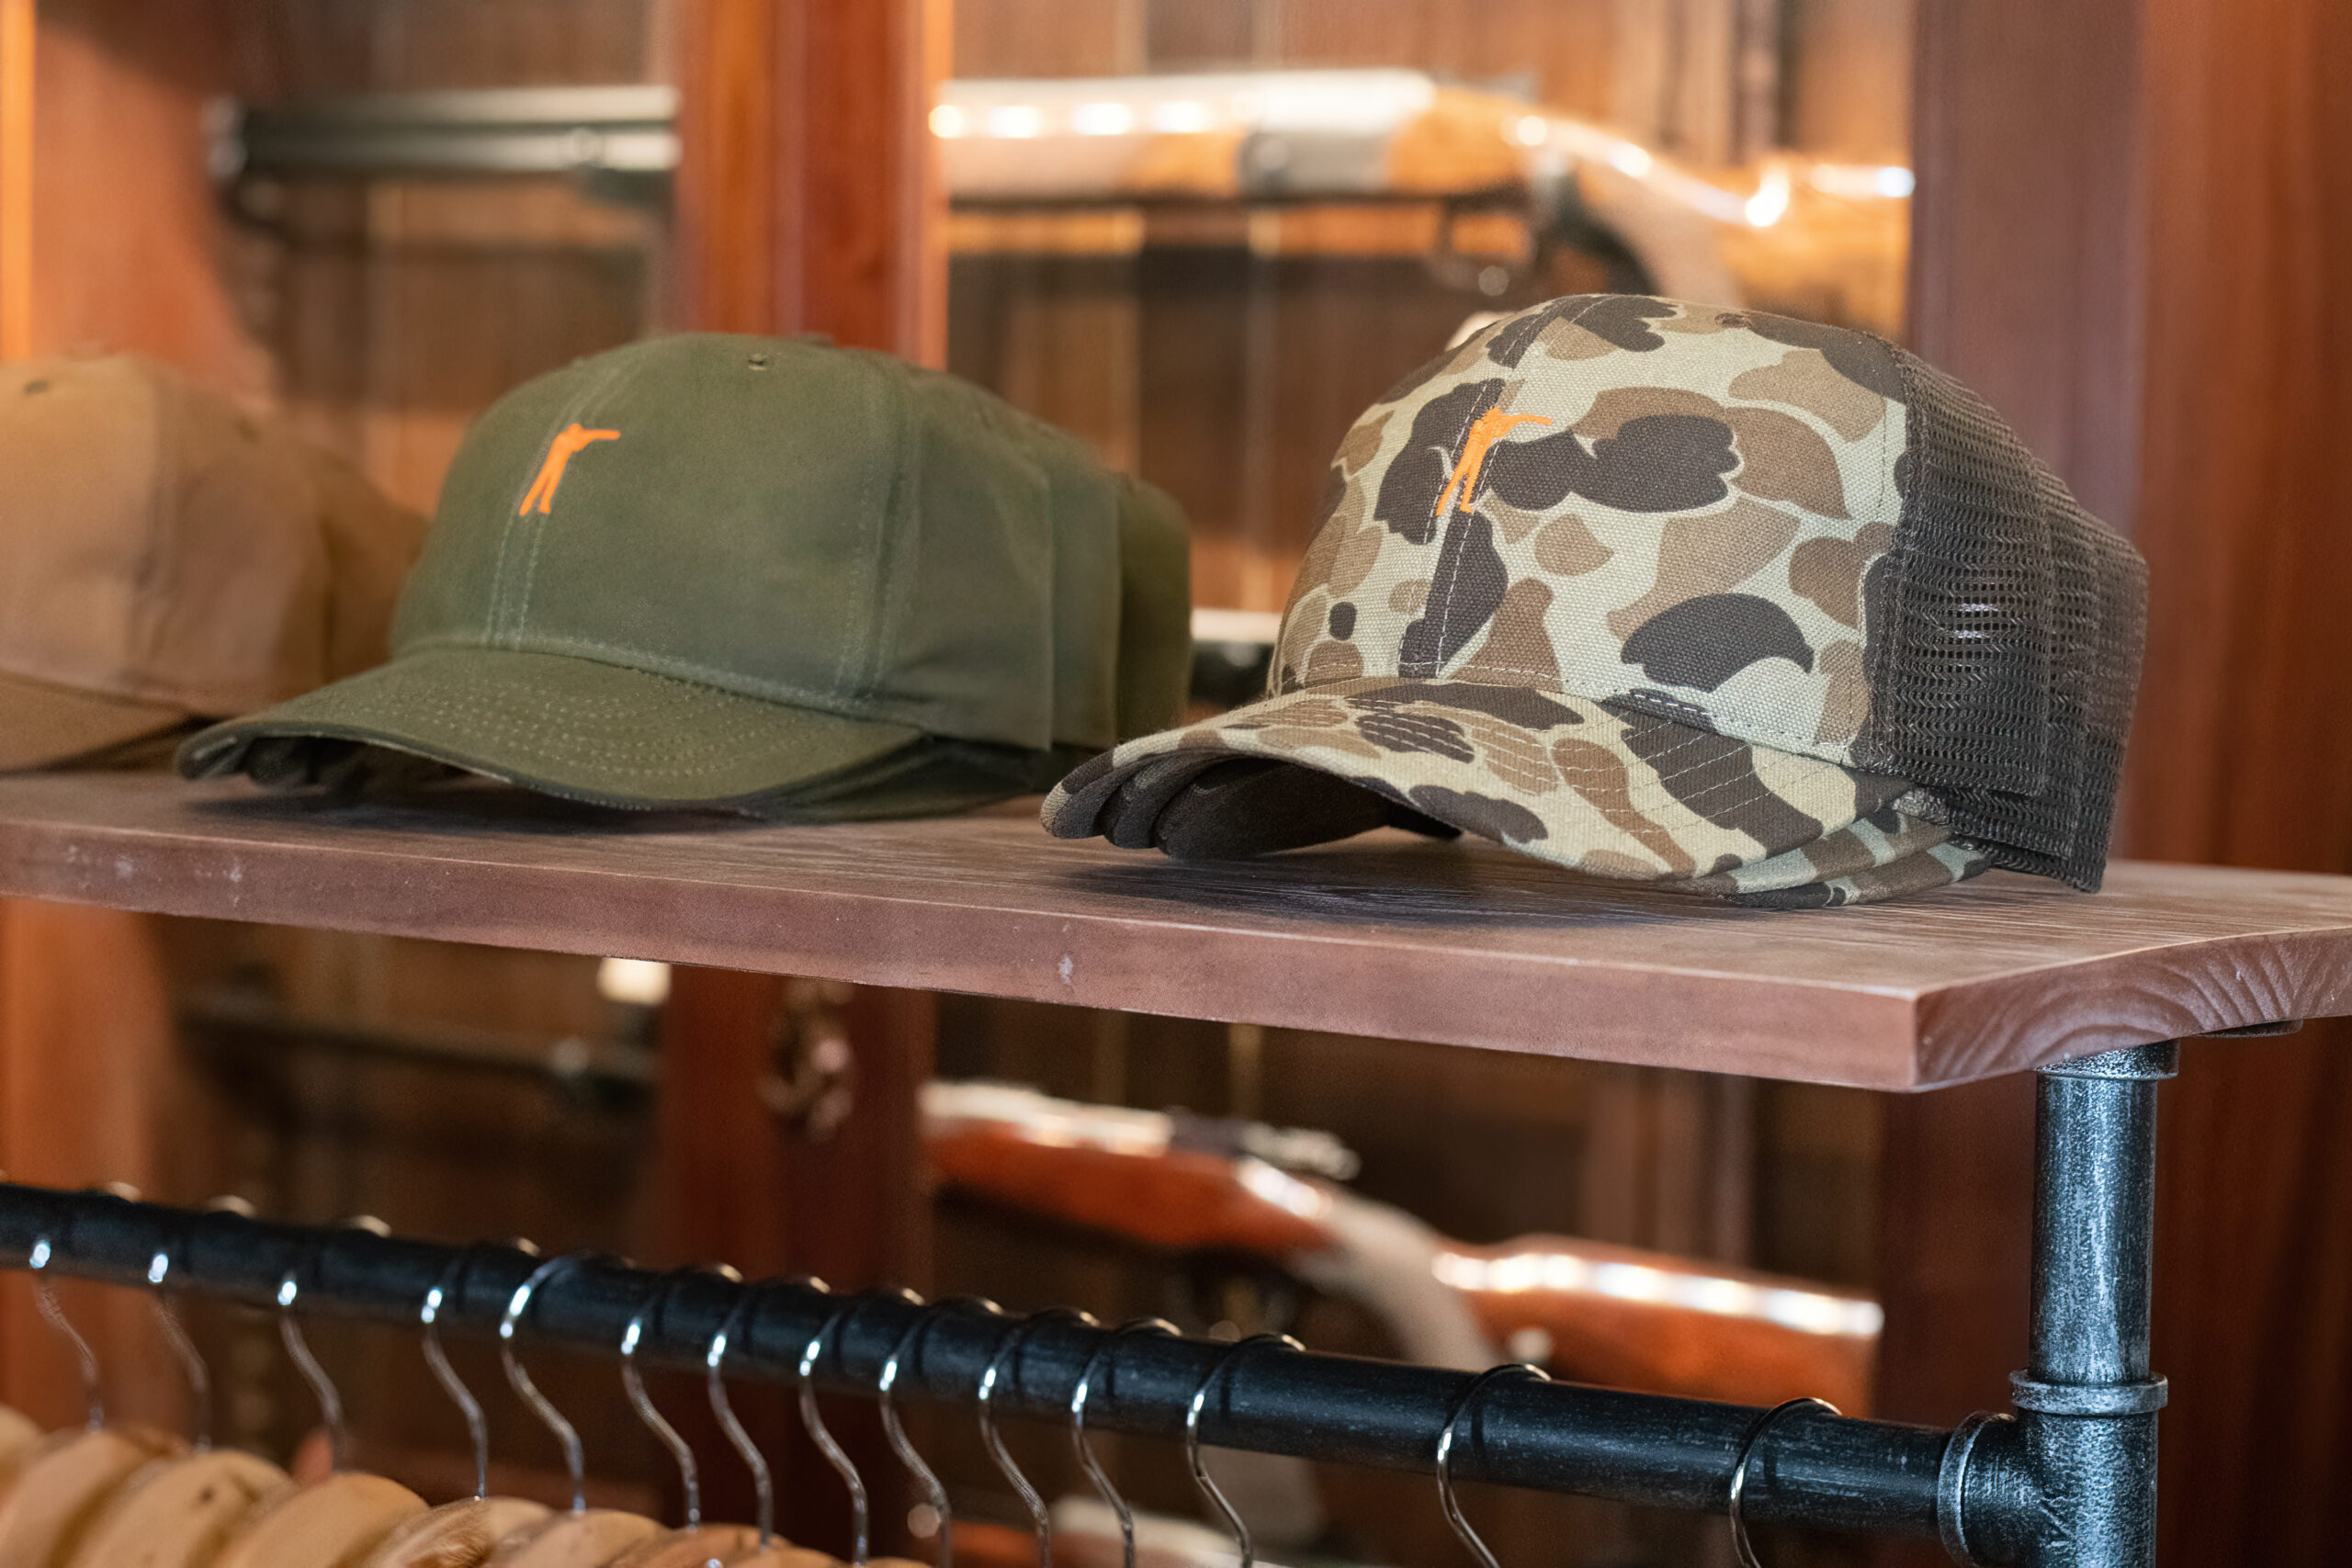 Ball and Buck hats and Apparel